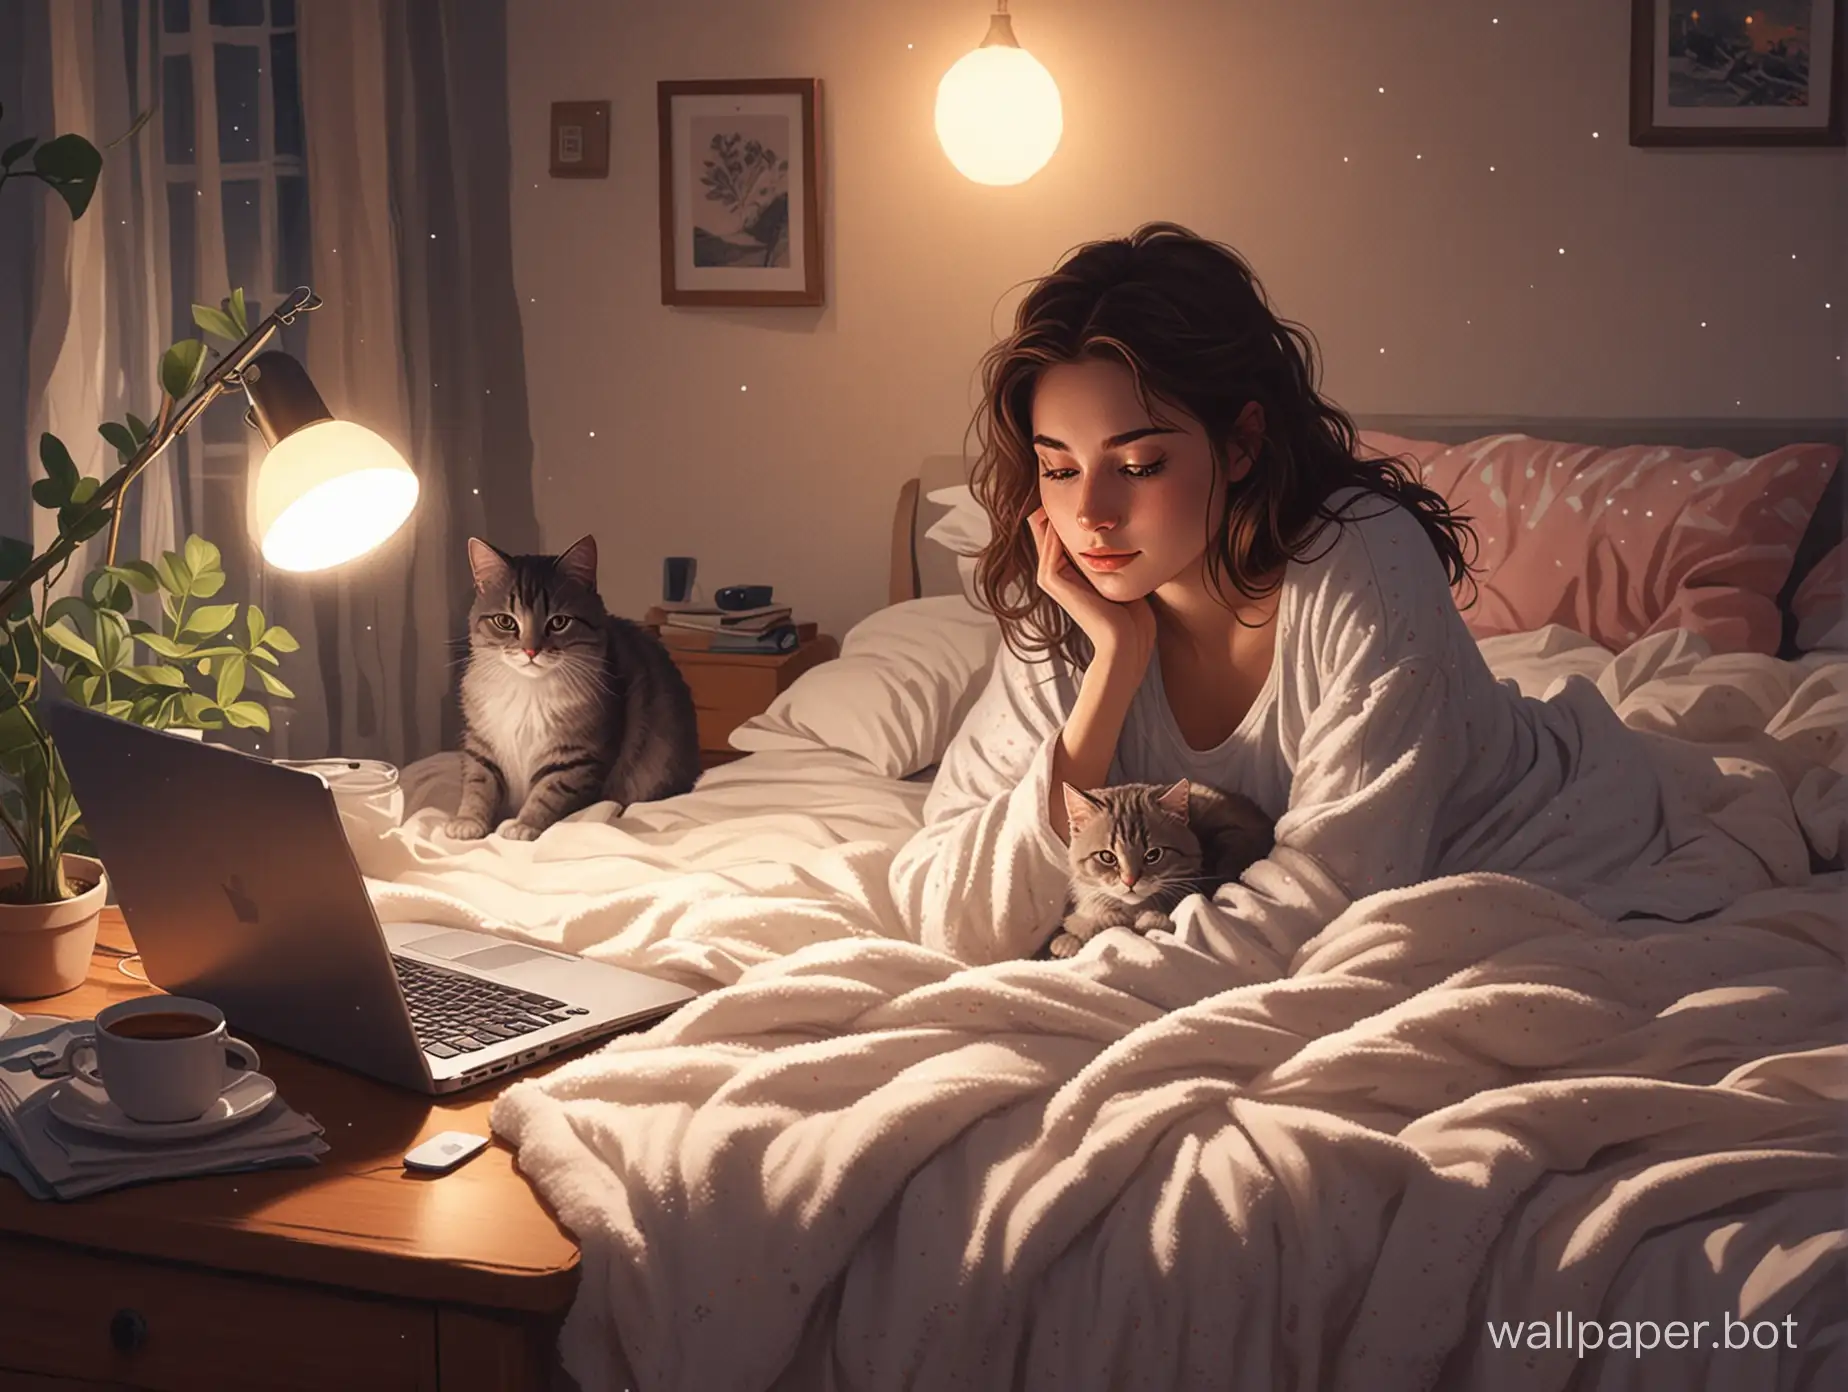 A captivating illustration of a young woman in her 20s, working on her laptop while lying in bed at night. She is engrossed in her work, wearing cozy pajamas and a fuzzy blanket. Soft lo-fi music plays in the background, creating a calming atmosphere. A curious cat sits nearby, observing her intently. The room is dimly lit, with a warm and inviting ambiance., illustration, painting